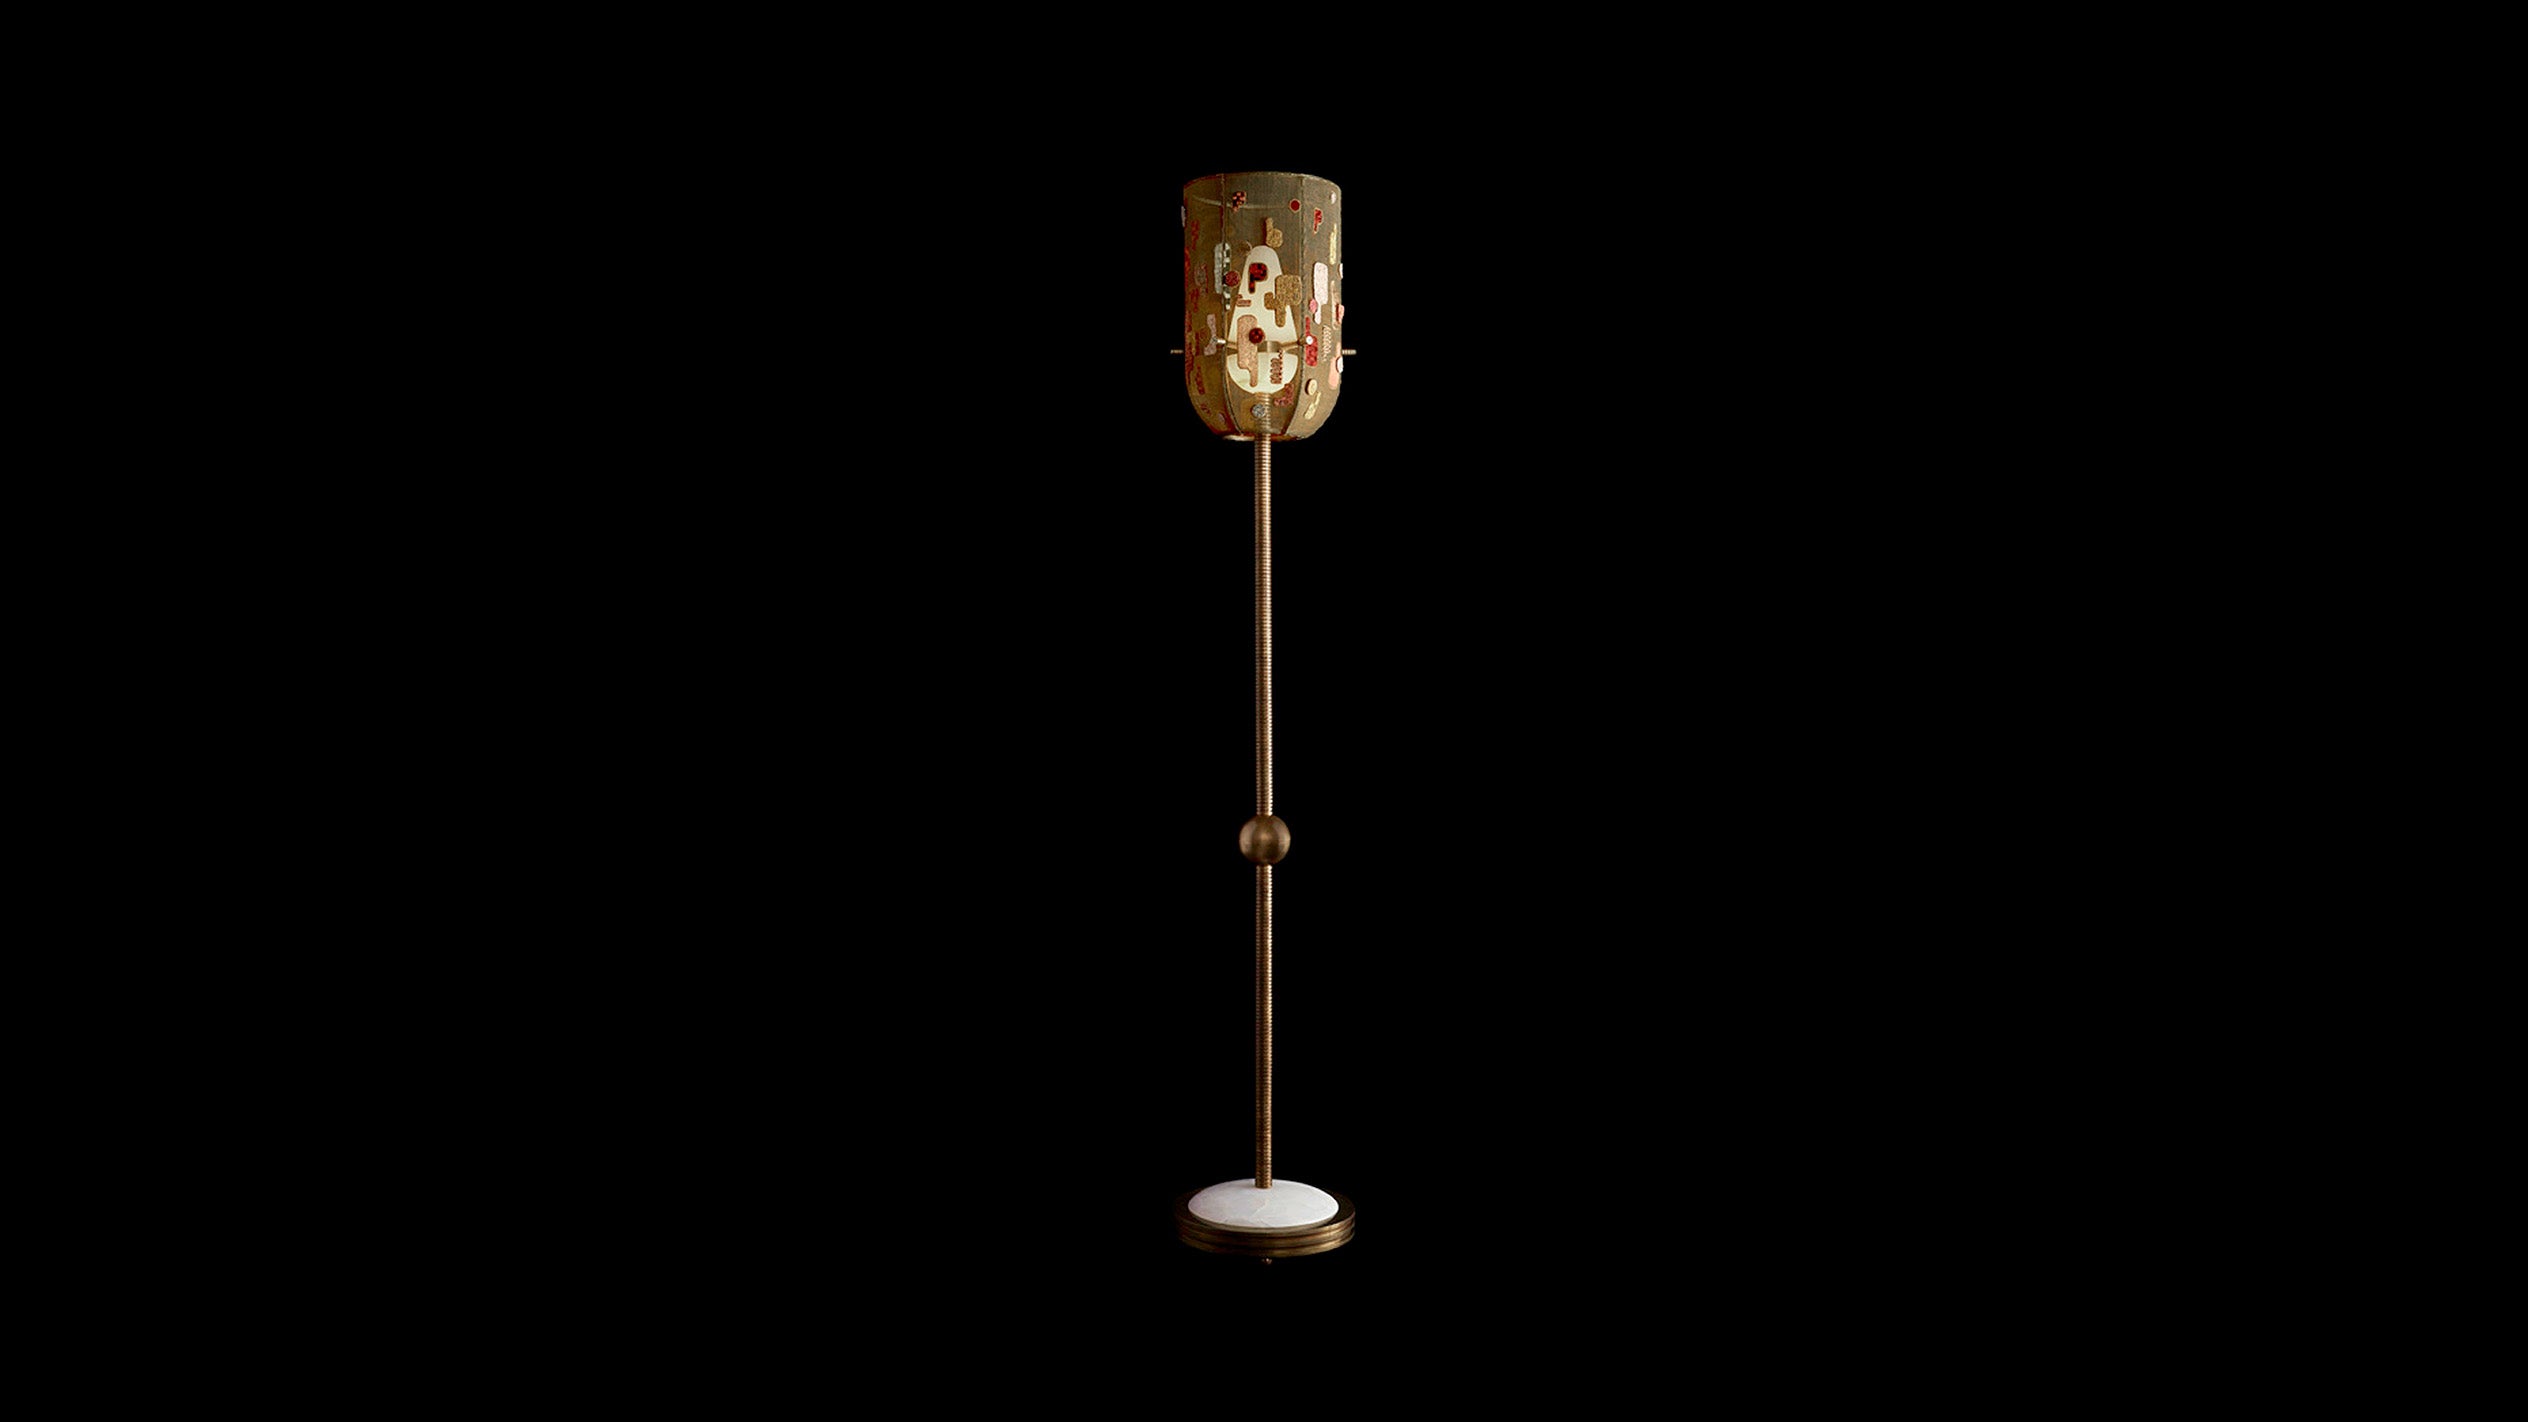 Hand-embroidered INTERLUDE floor lamp shown against a black background. 